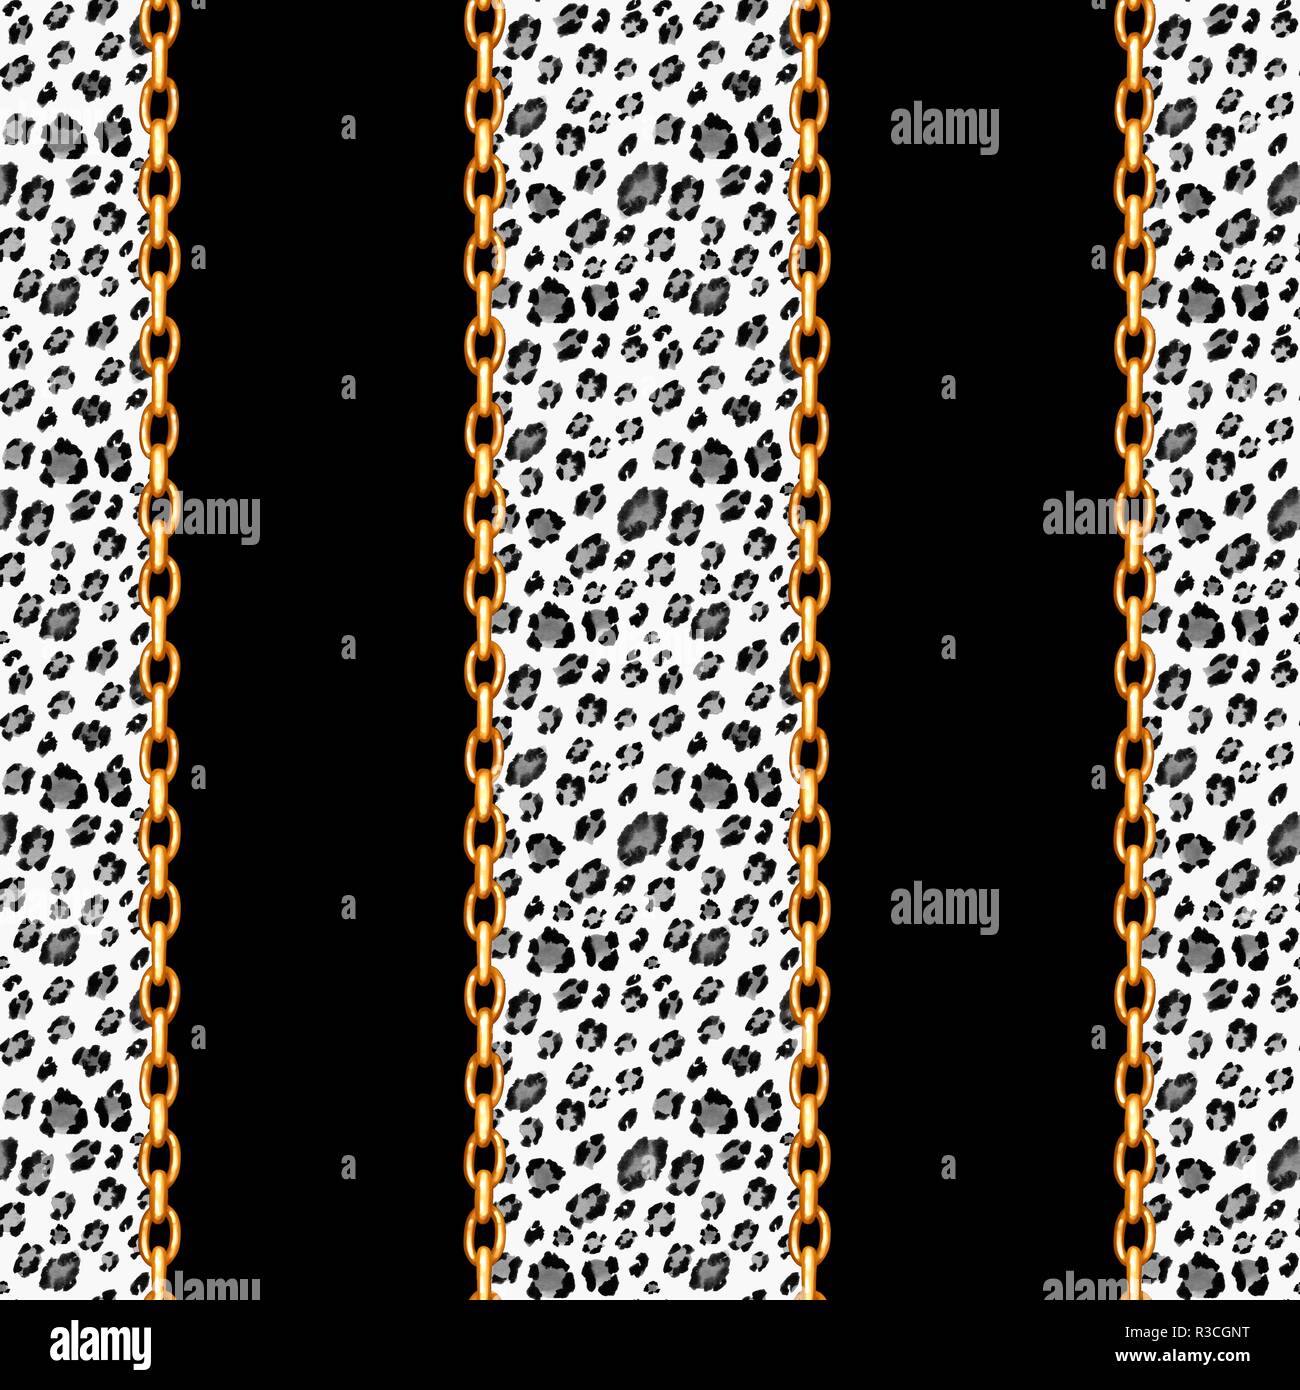 Seamless leopard pattern and golden chains Stock Photo